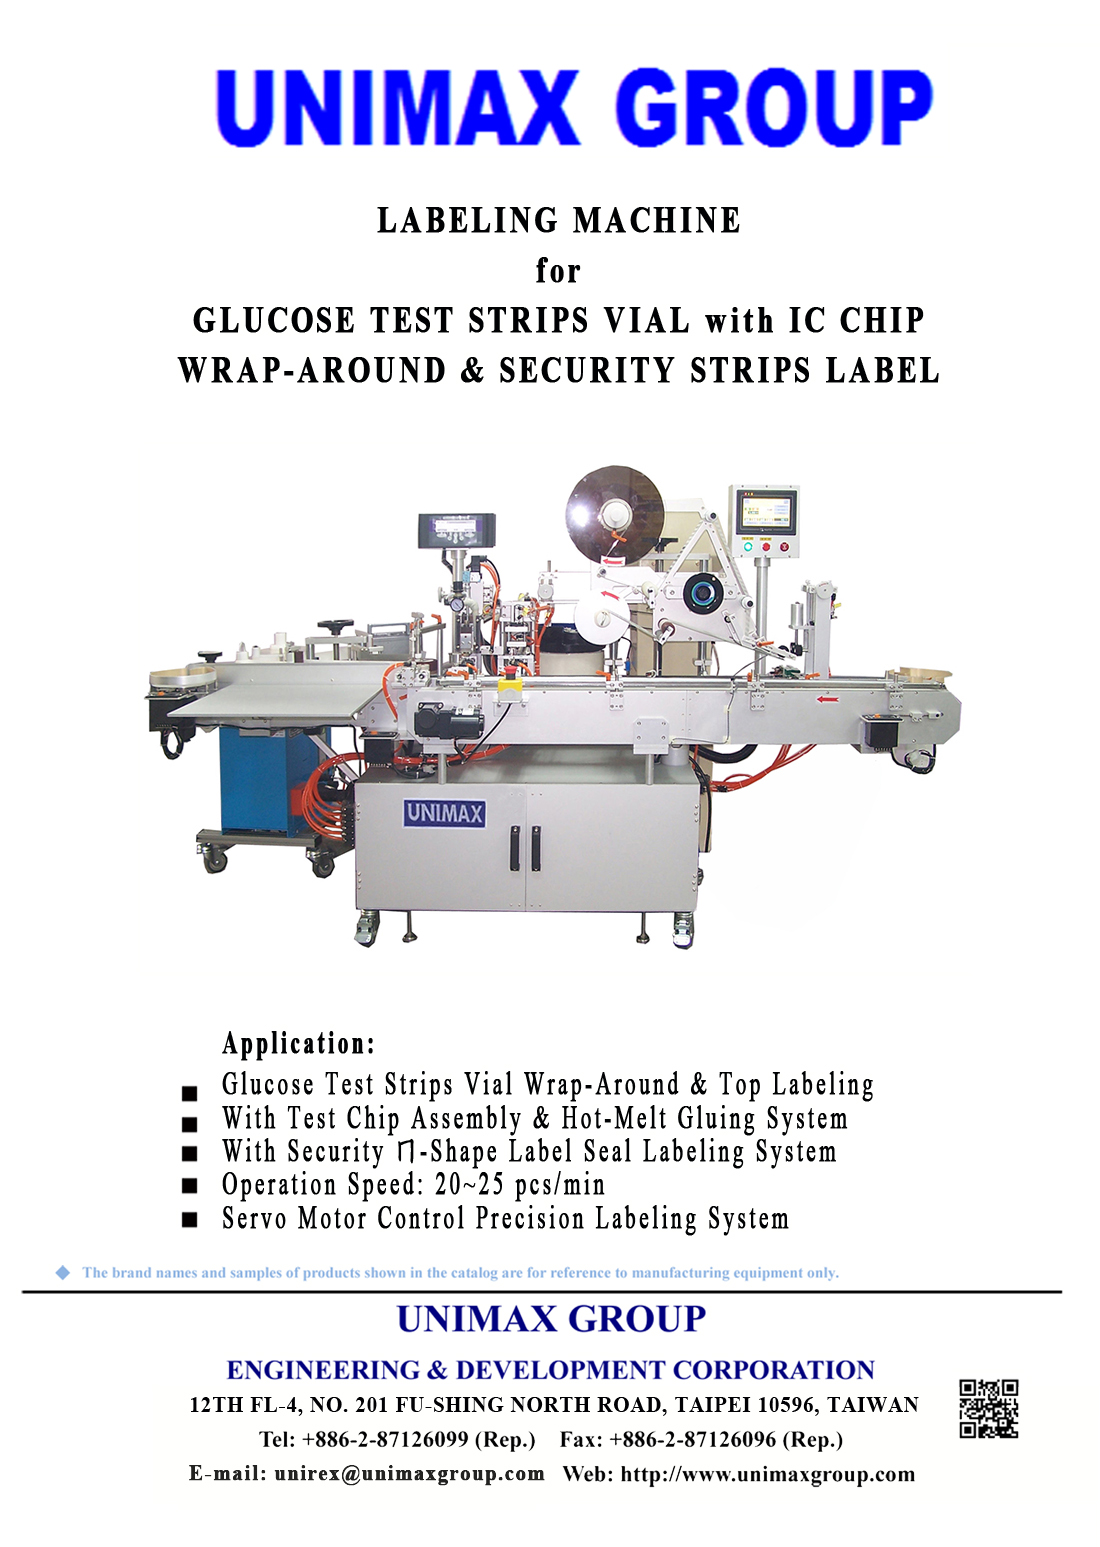 Glucose Test Strips Vial Labeling Machine for Wrap-Around & Security Strip Label with IC Chip